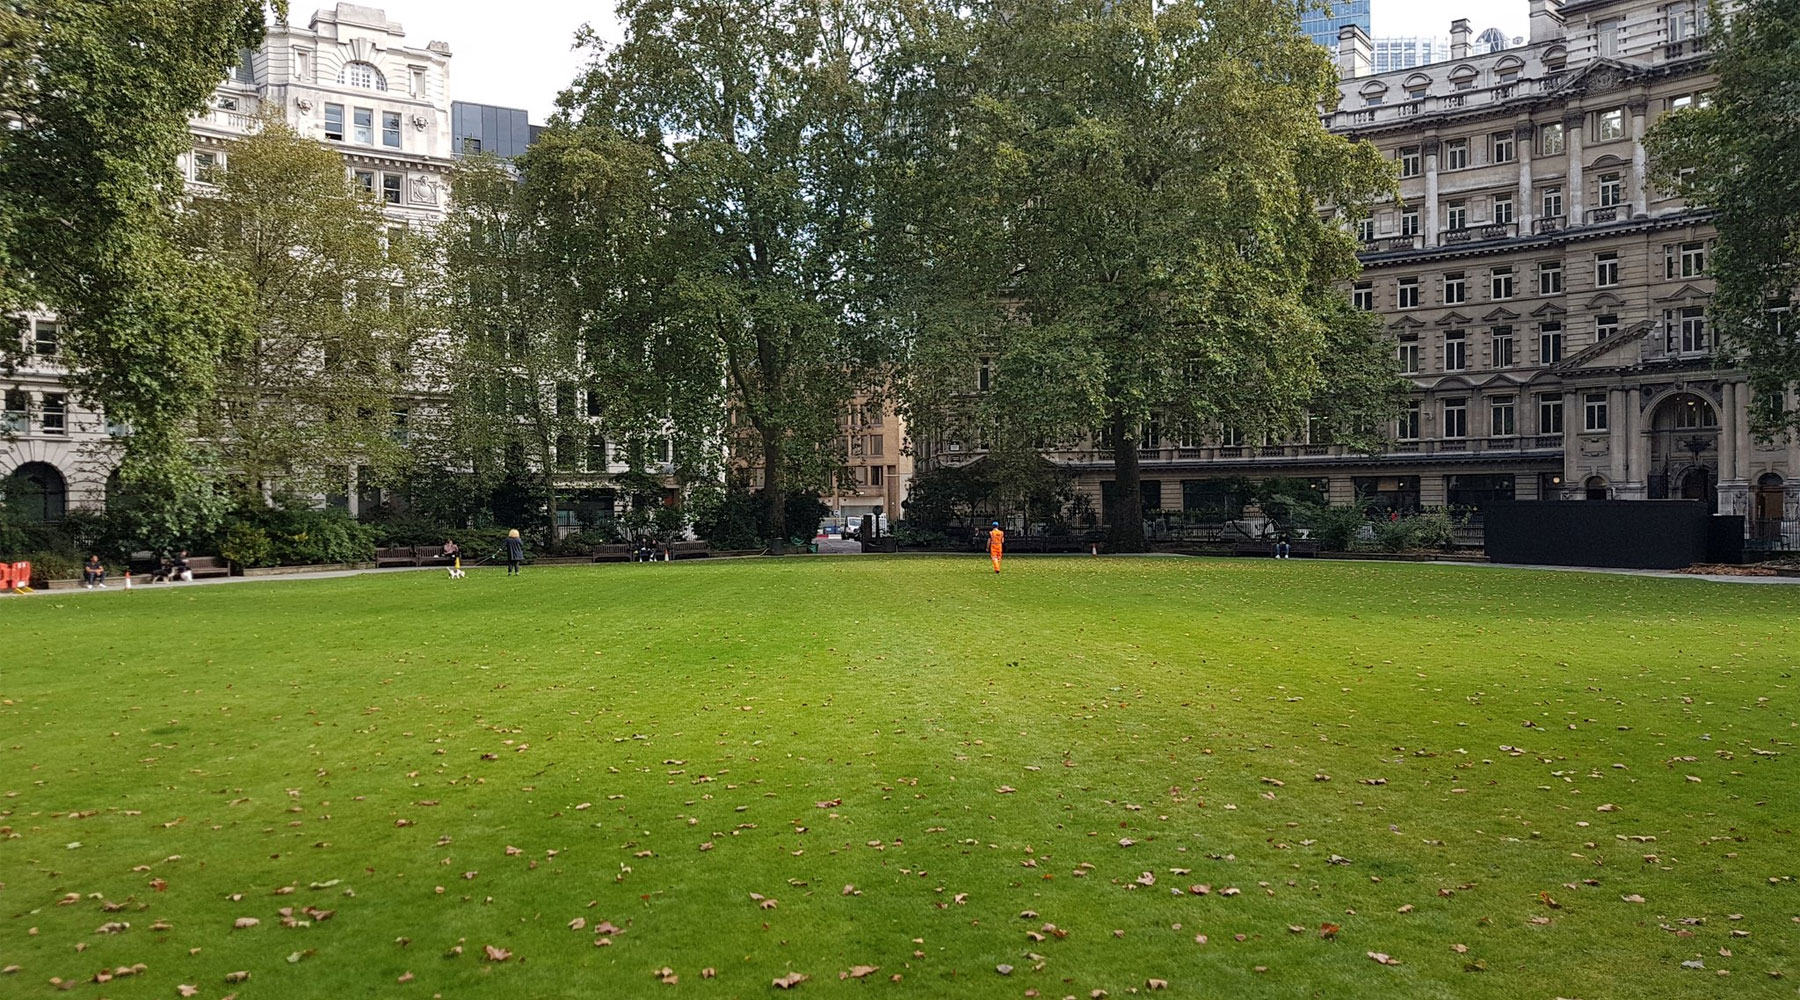 Finsbury Circus Gardens are to close for a year